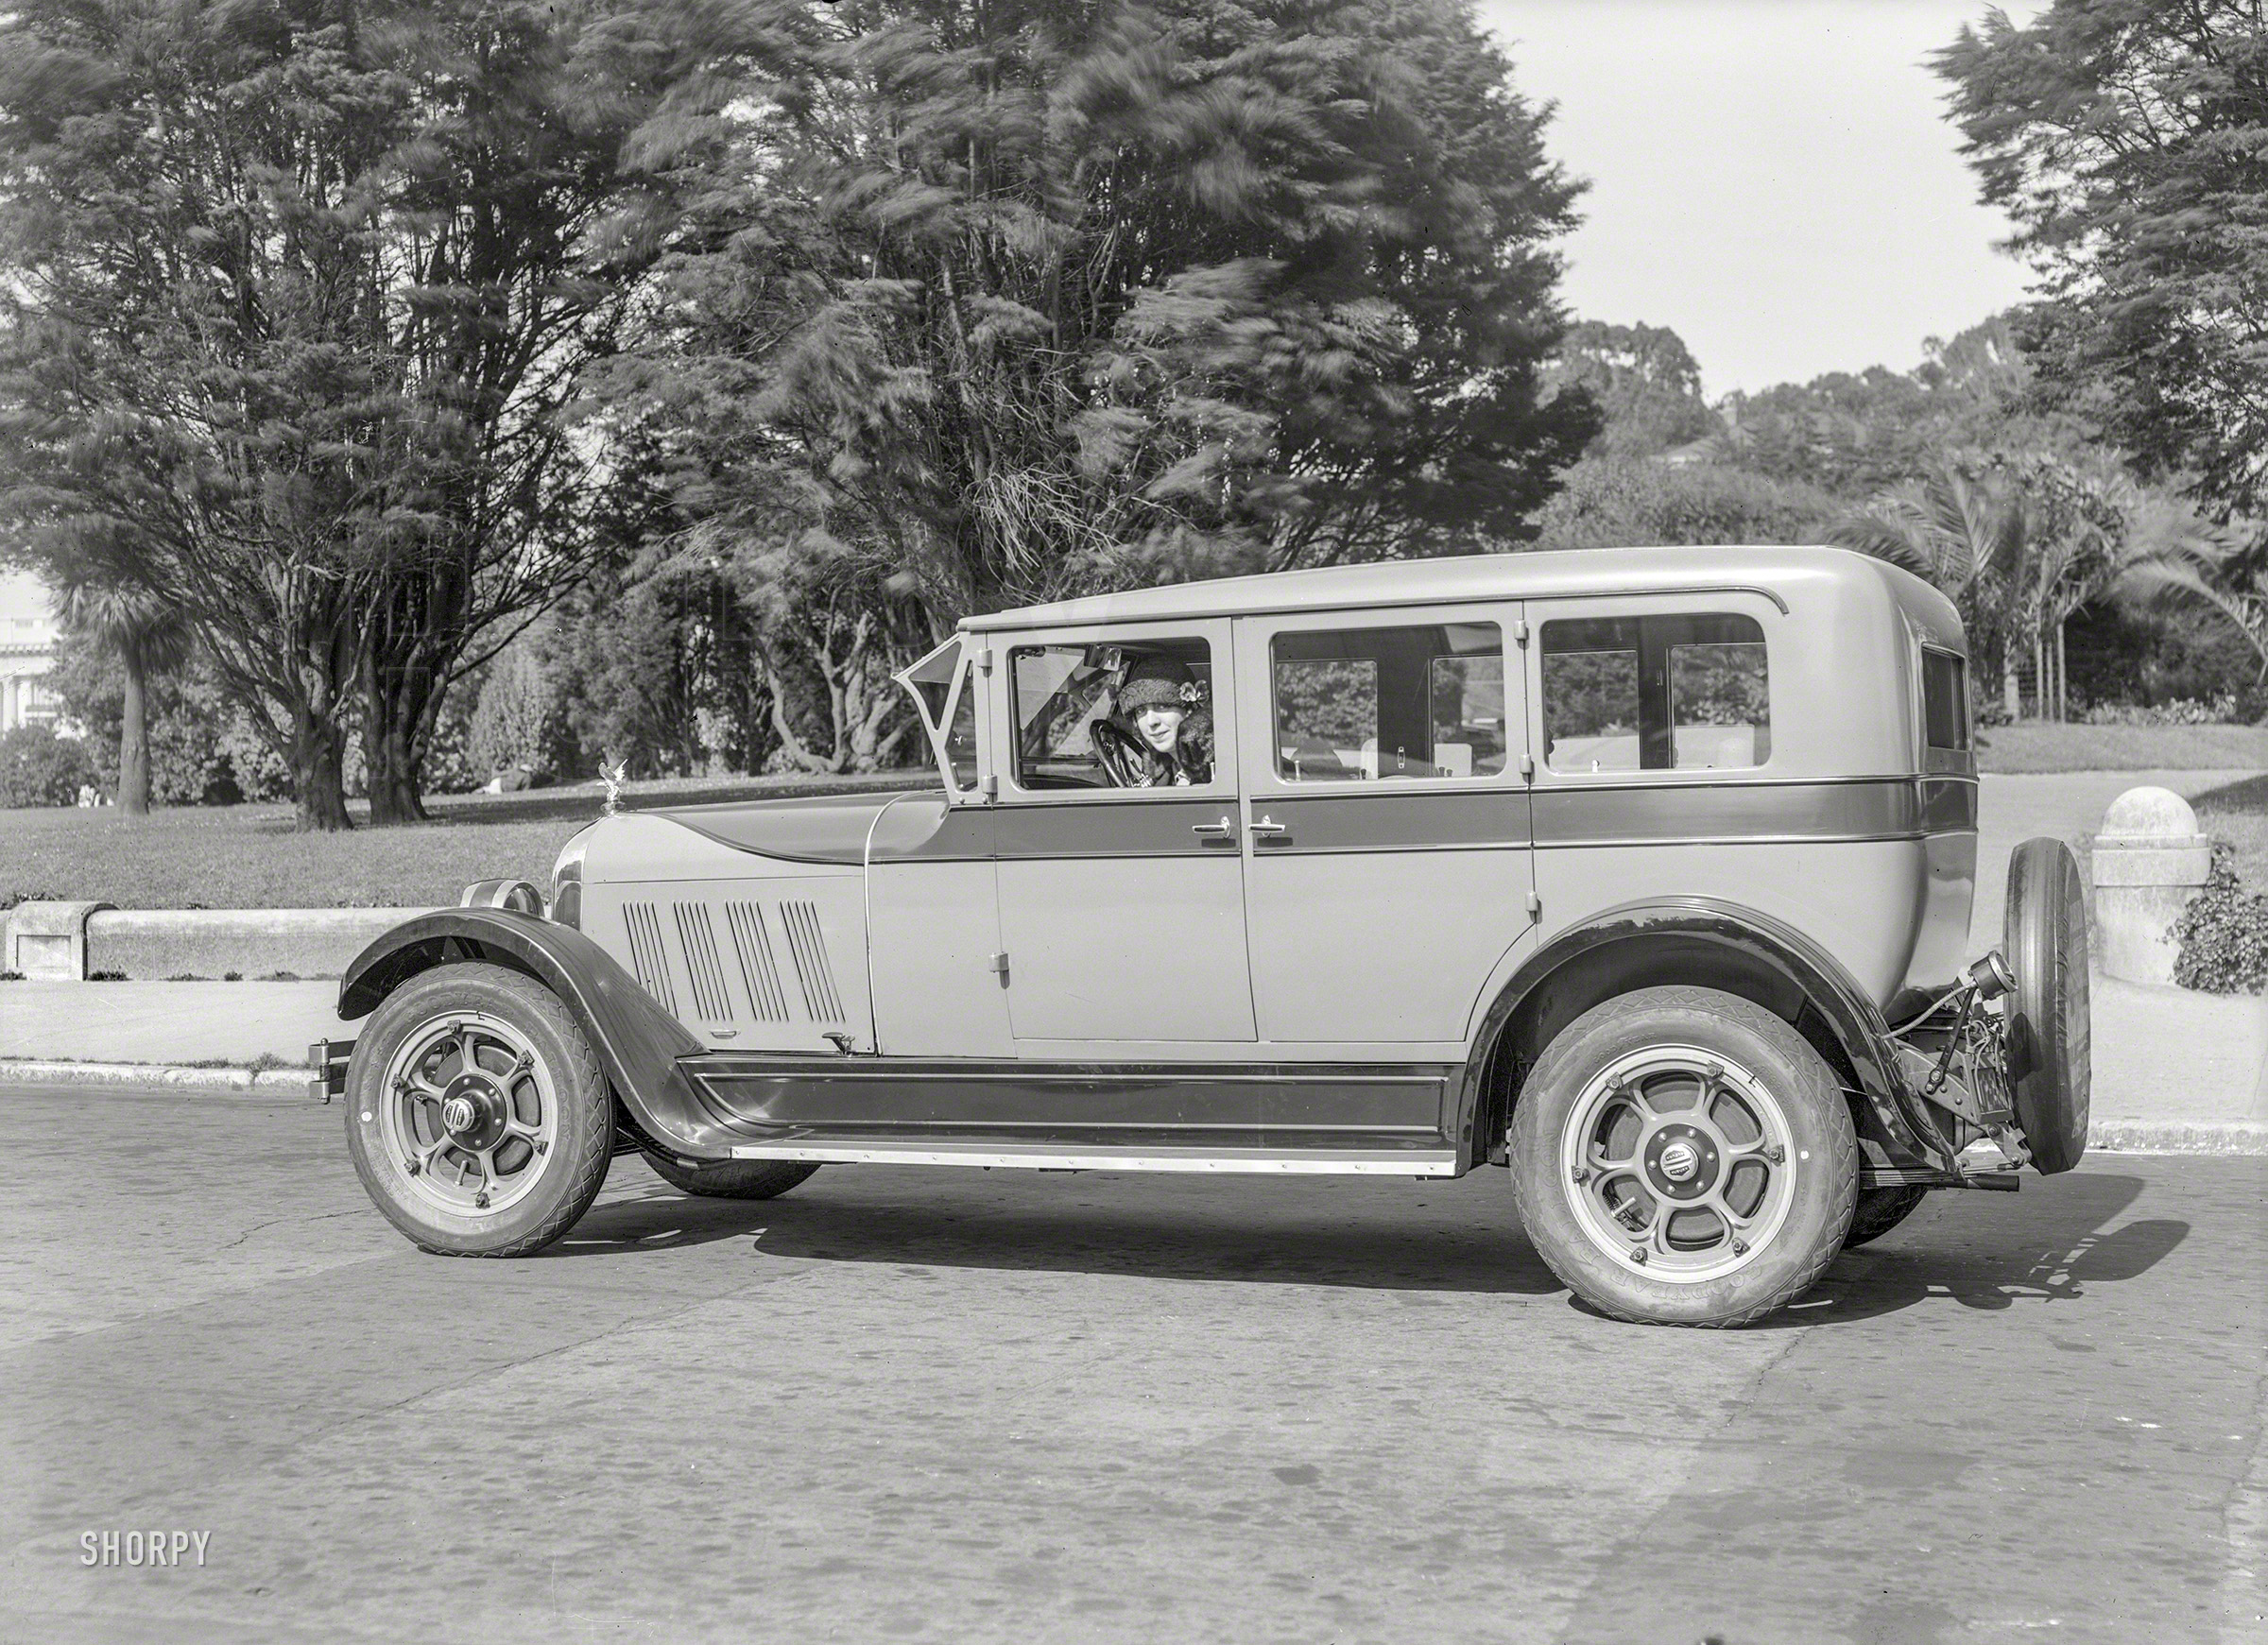 San Francisco circa 1928. "Auburn sedan." Latest exhibit in the Shorpy Diorama of Disappeared Dreadnoughts. Glass negative by Christopher Helin. View full size.